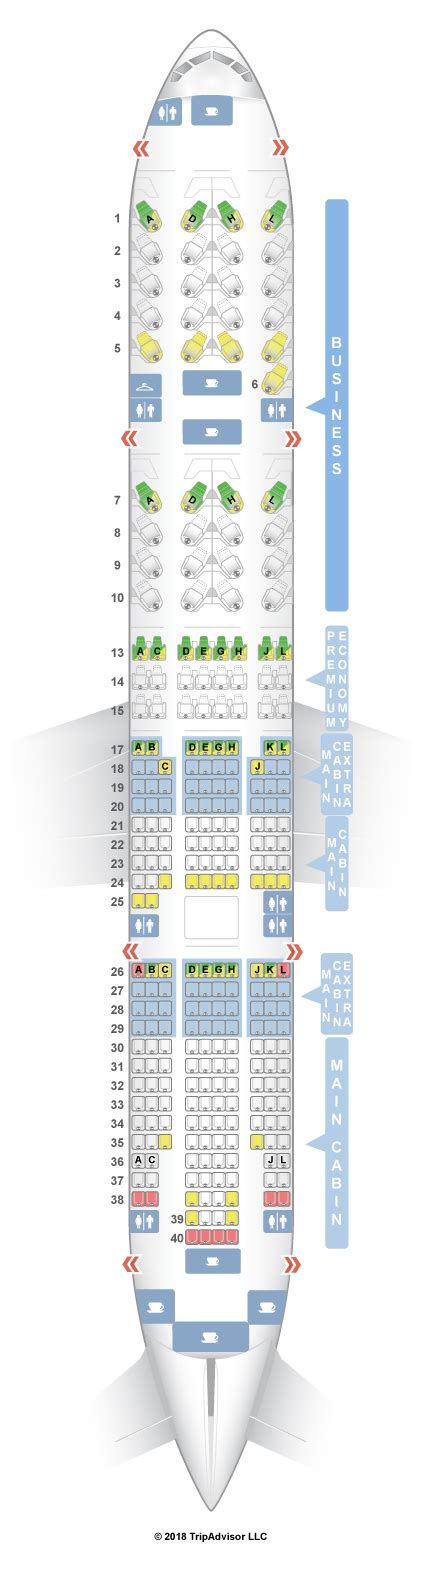 American airlines boeing 777 200er seat map - View all available seats on your next American Airlines flight. Our comprehensive seat maps and seating charts on AA.com display seat availability for every aircraft ...